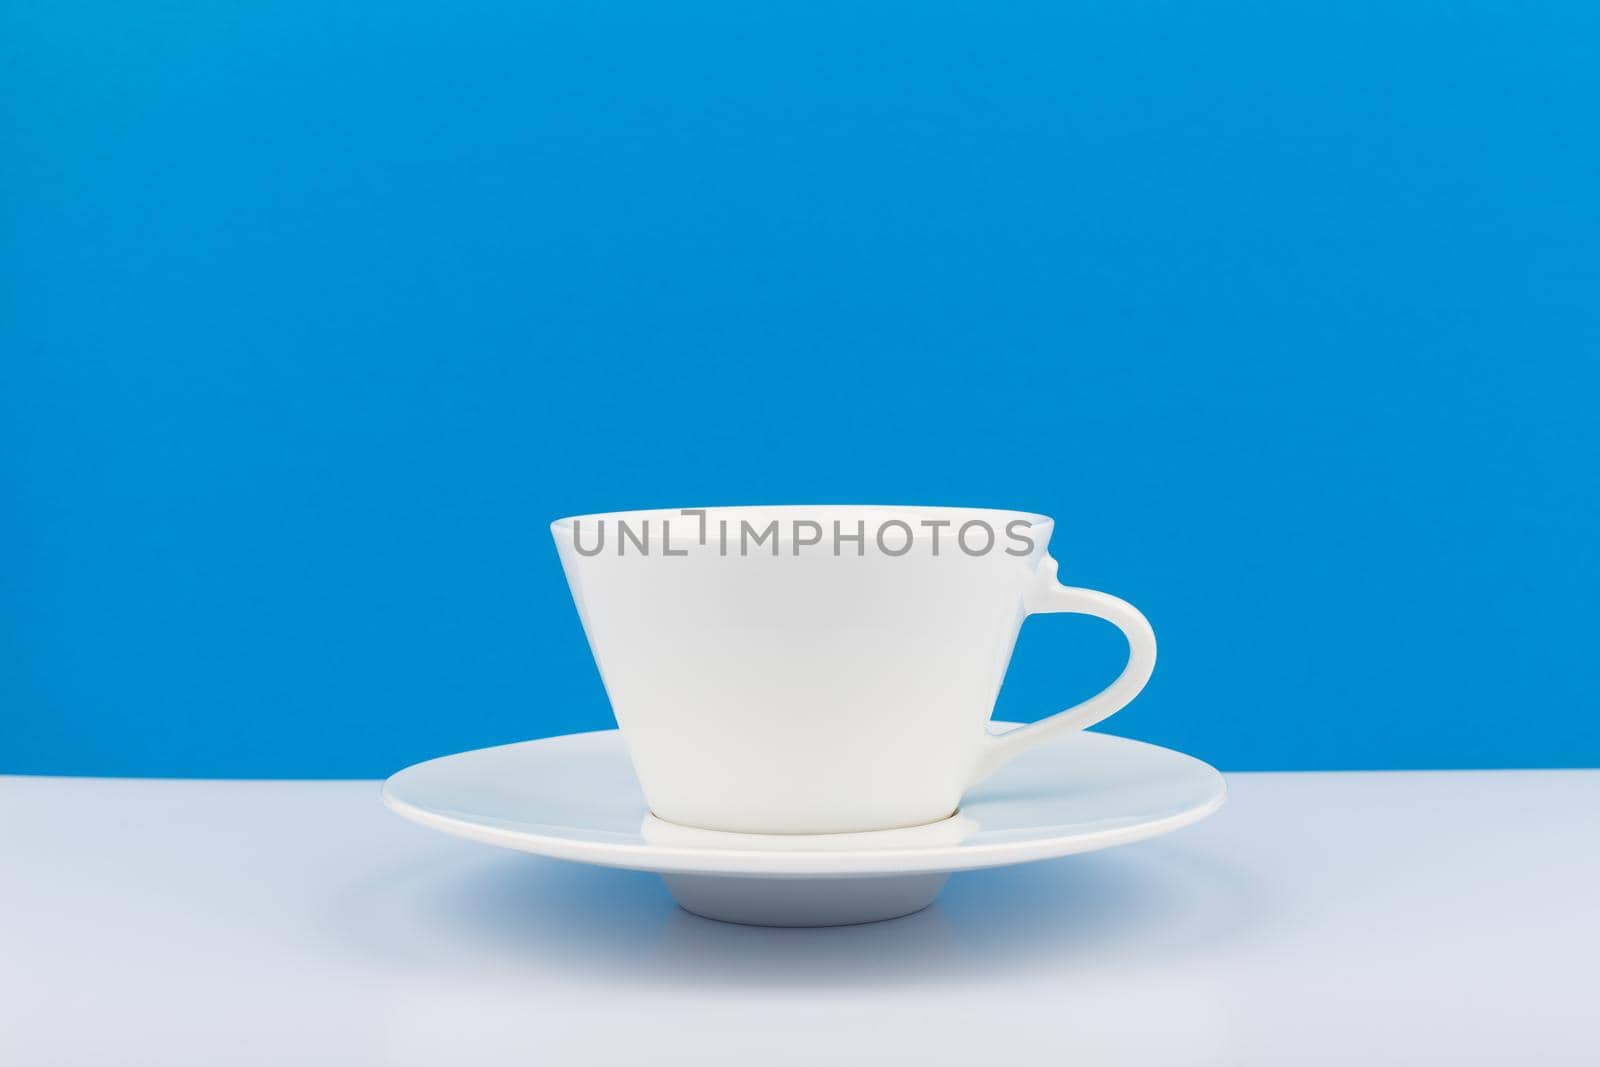 Minimalistic still life with white ceramic coffee cup with a saucer on white table against blue background with space for text